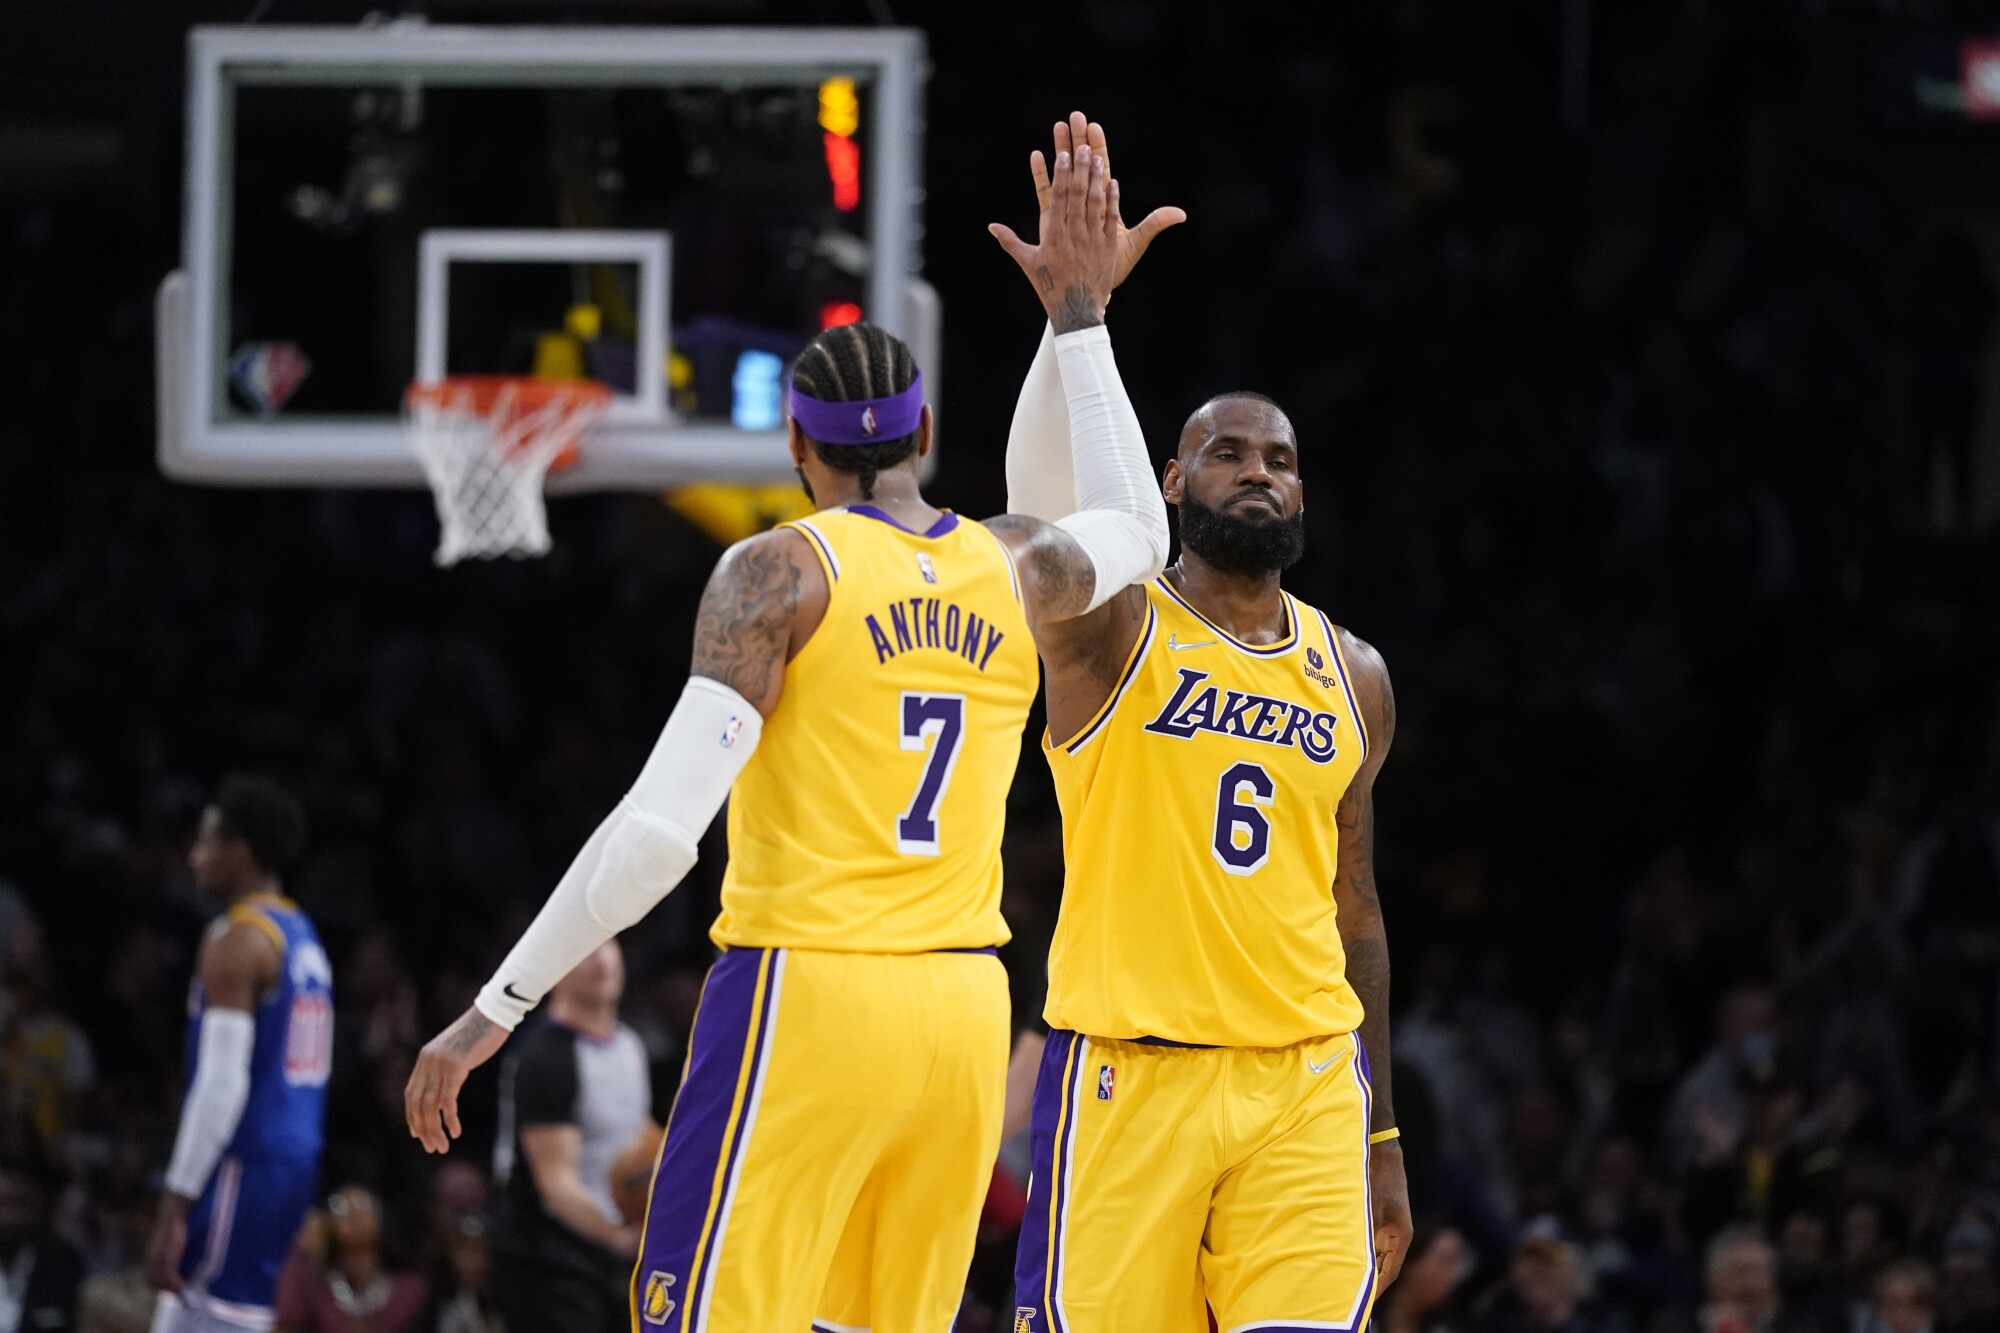 Lakers forward Carmelo Anthony (7) high-fives LeBron James.